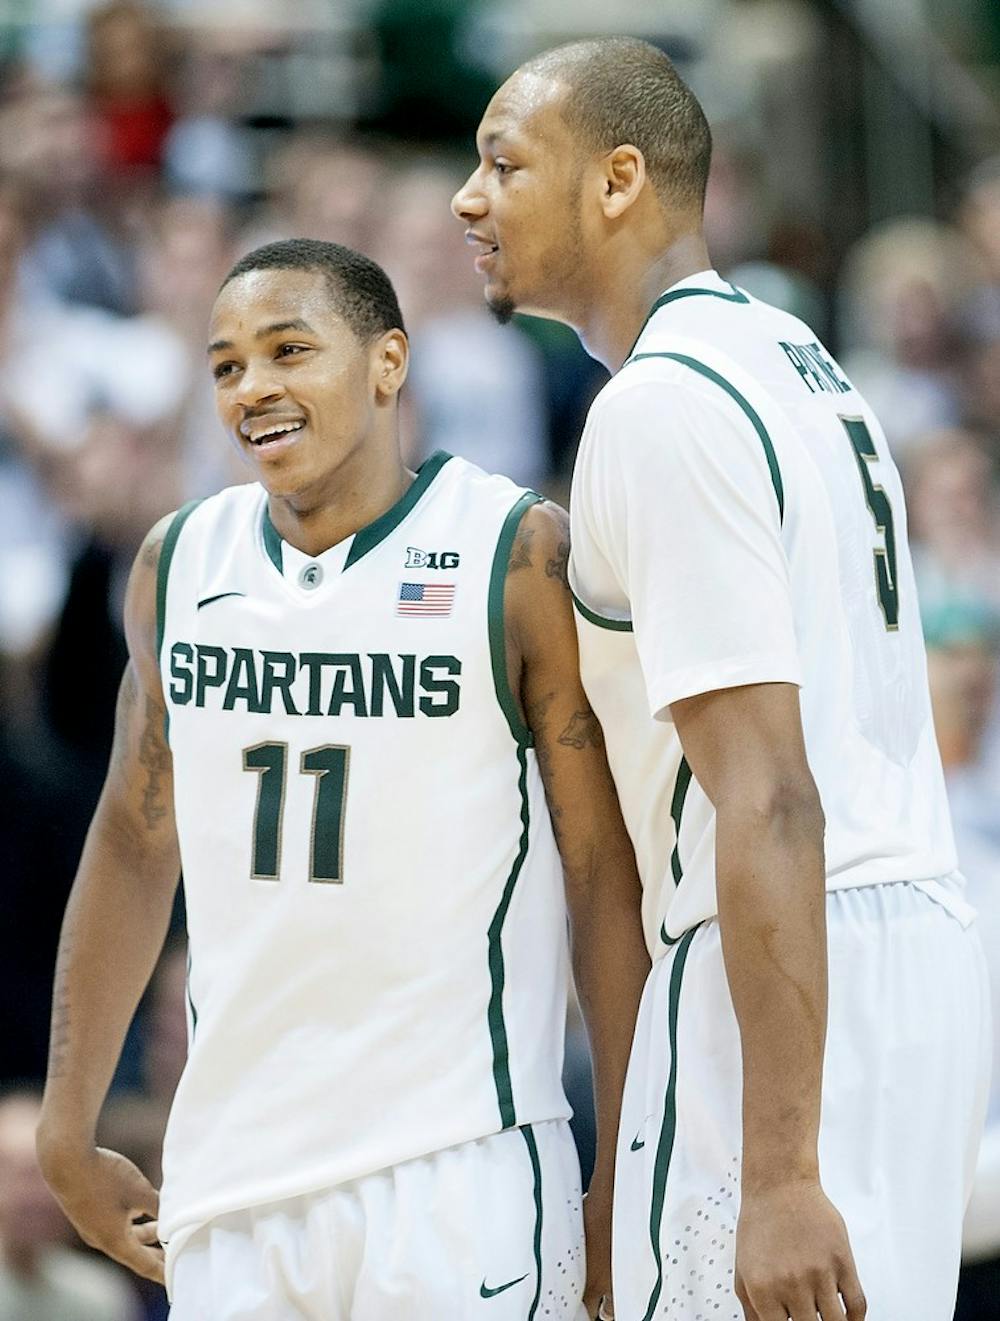 	<p>Junior guard Keith Appling, left, laughs with junior center Adreian Payne at the final minutes of the game. Payne contributed 14 points while Appling scored 8. The Spartans defeated the Cornhuskers, 66-56, Sunday, Jan. 13, 2013, at Breslin Center. Justin Wan/The State News</p>